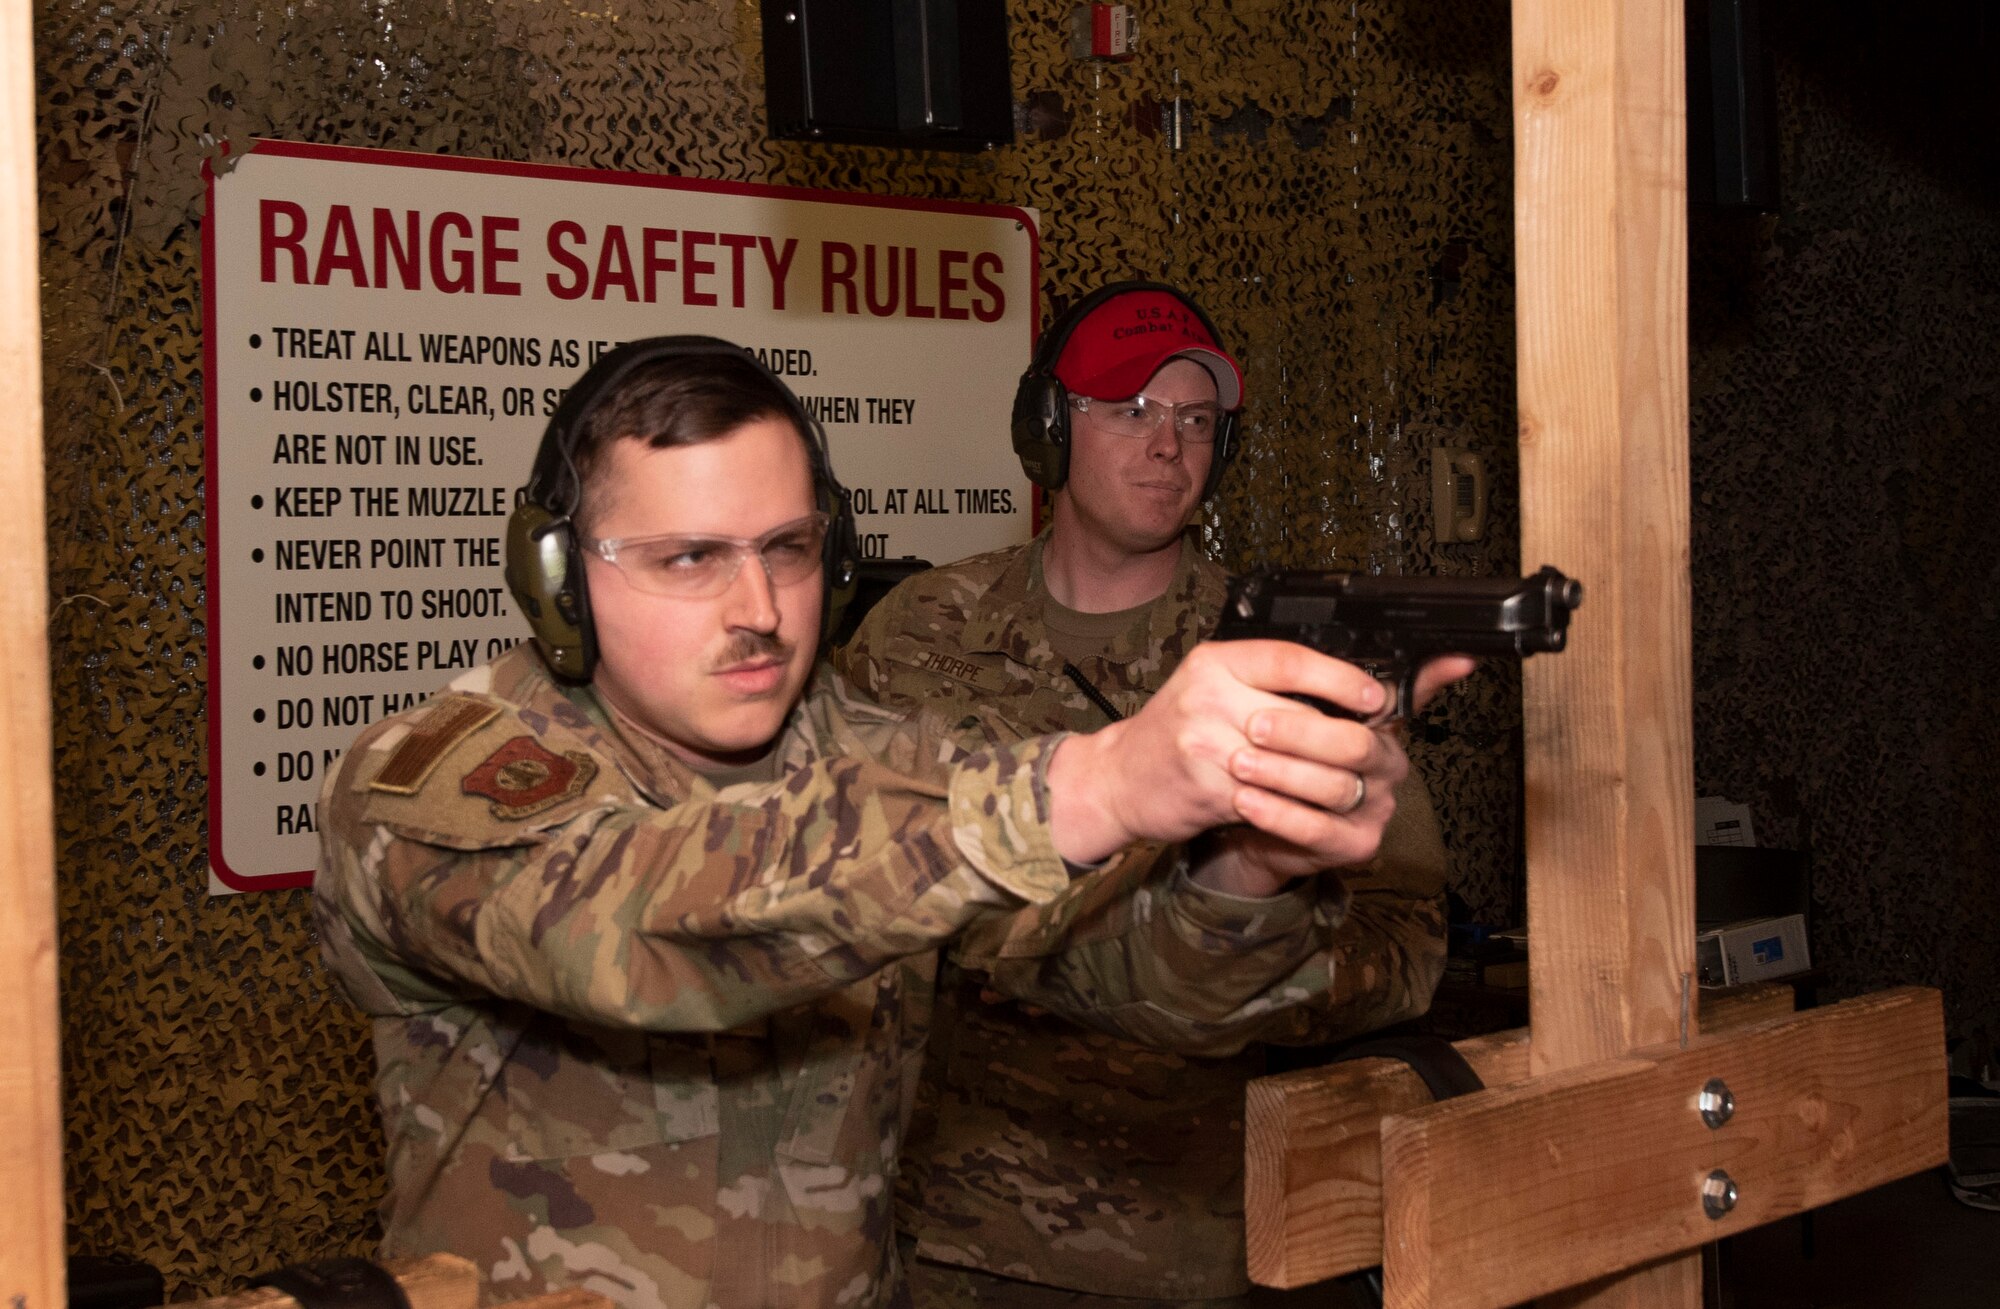 Senior Airman Austin Hopper, 50th Security Force Squadron resource and logistics, conducts a line of fire as Senior Airman Spencer Thorpe, 50th Security Forces Squadron combat arms instructor, provides coaching as range master at the 50th Security Forces shooting range at Schriever Air Force Base, Colorado, March 8, 2019. The combat arms instruction team at Schriever is responsible for ensuring members of the 50th SFS are proficient in the various weapons systems they can uses in their everyday duties. (U.S. Air Force Photo by Staff Sgt. Matthew Coleman-Foster)